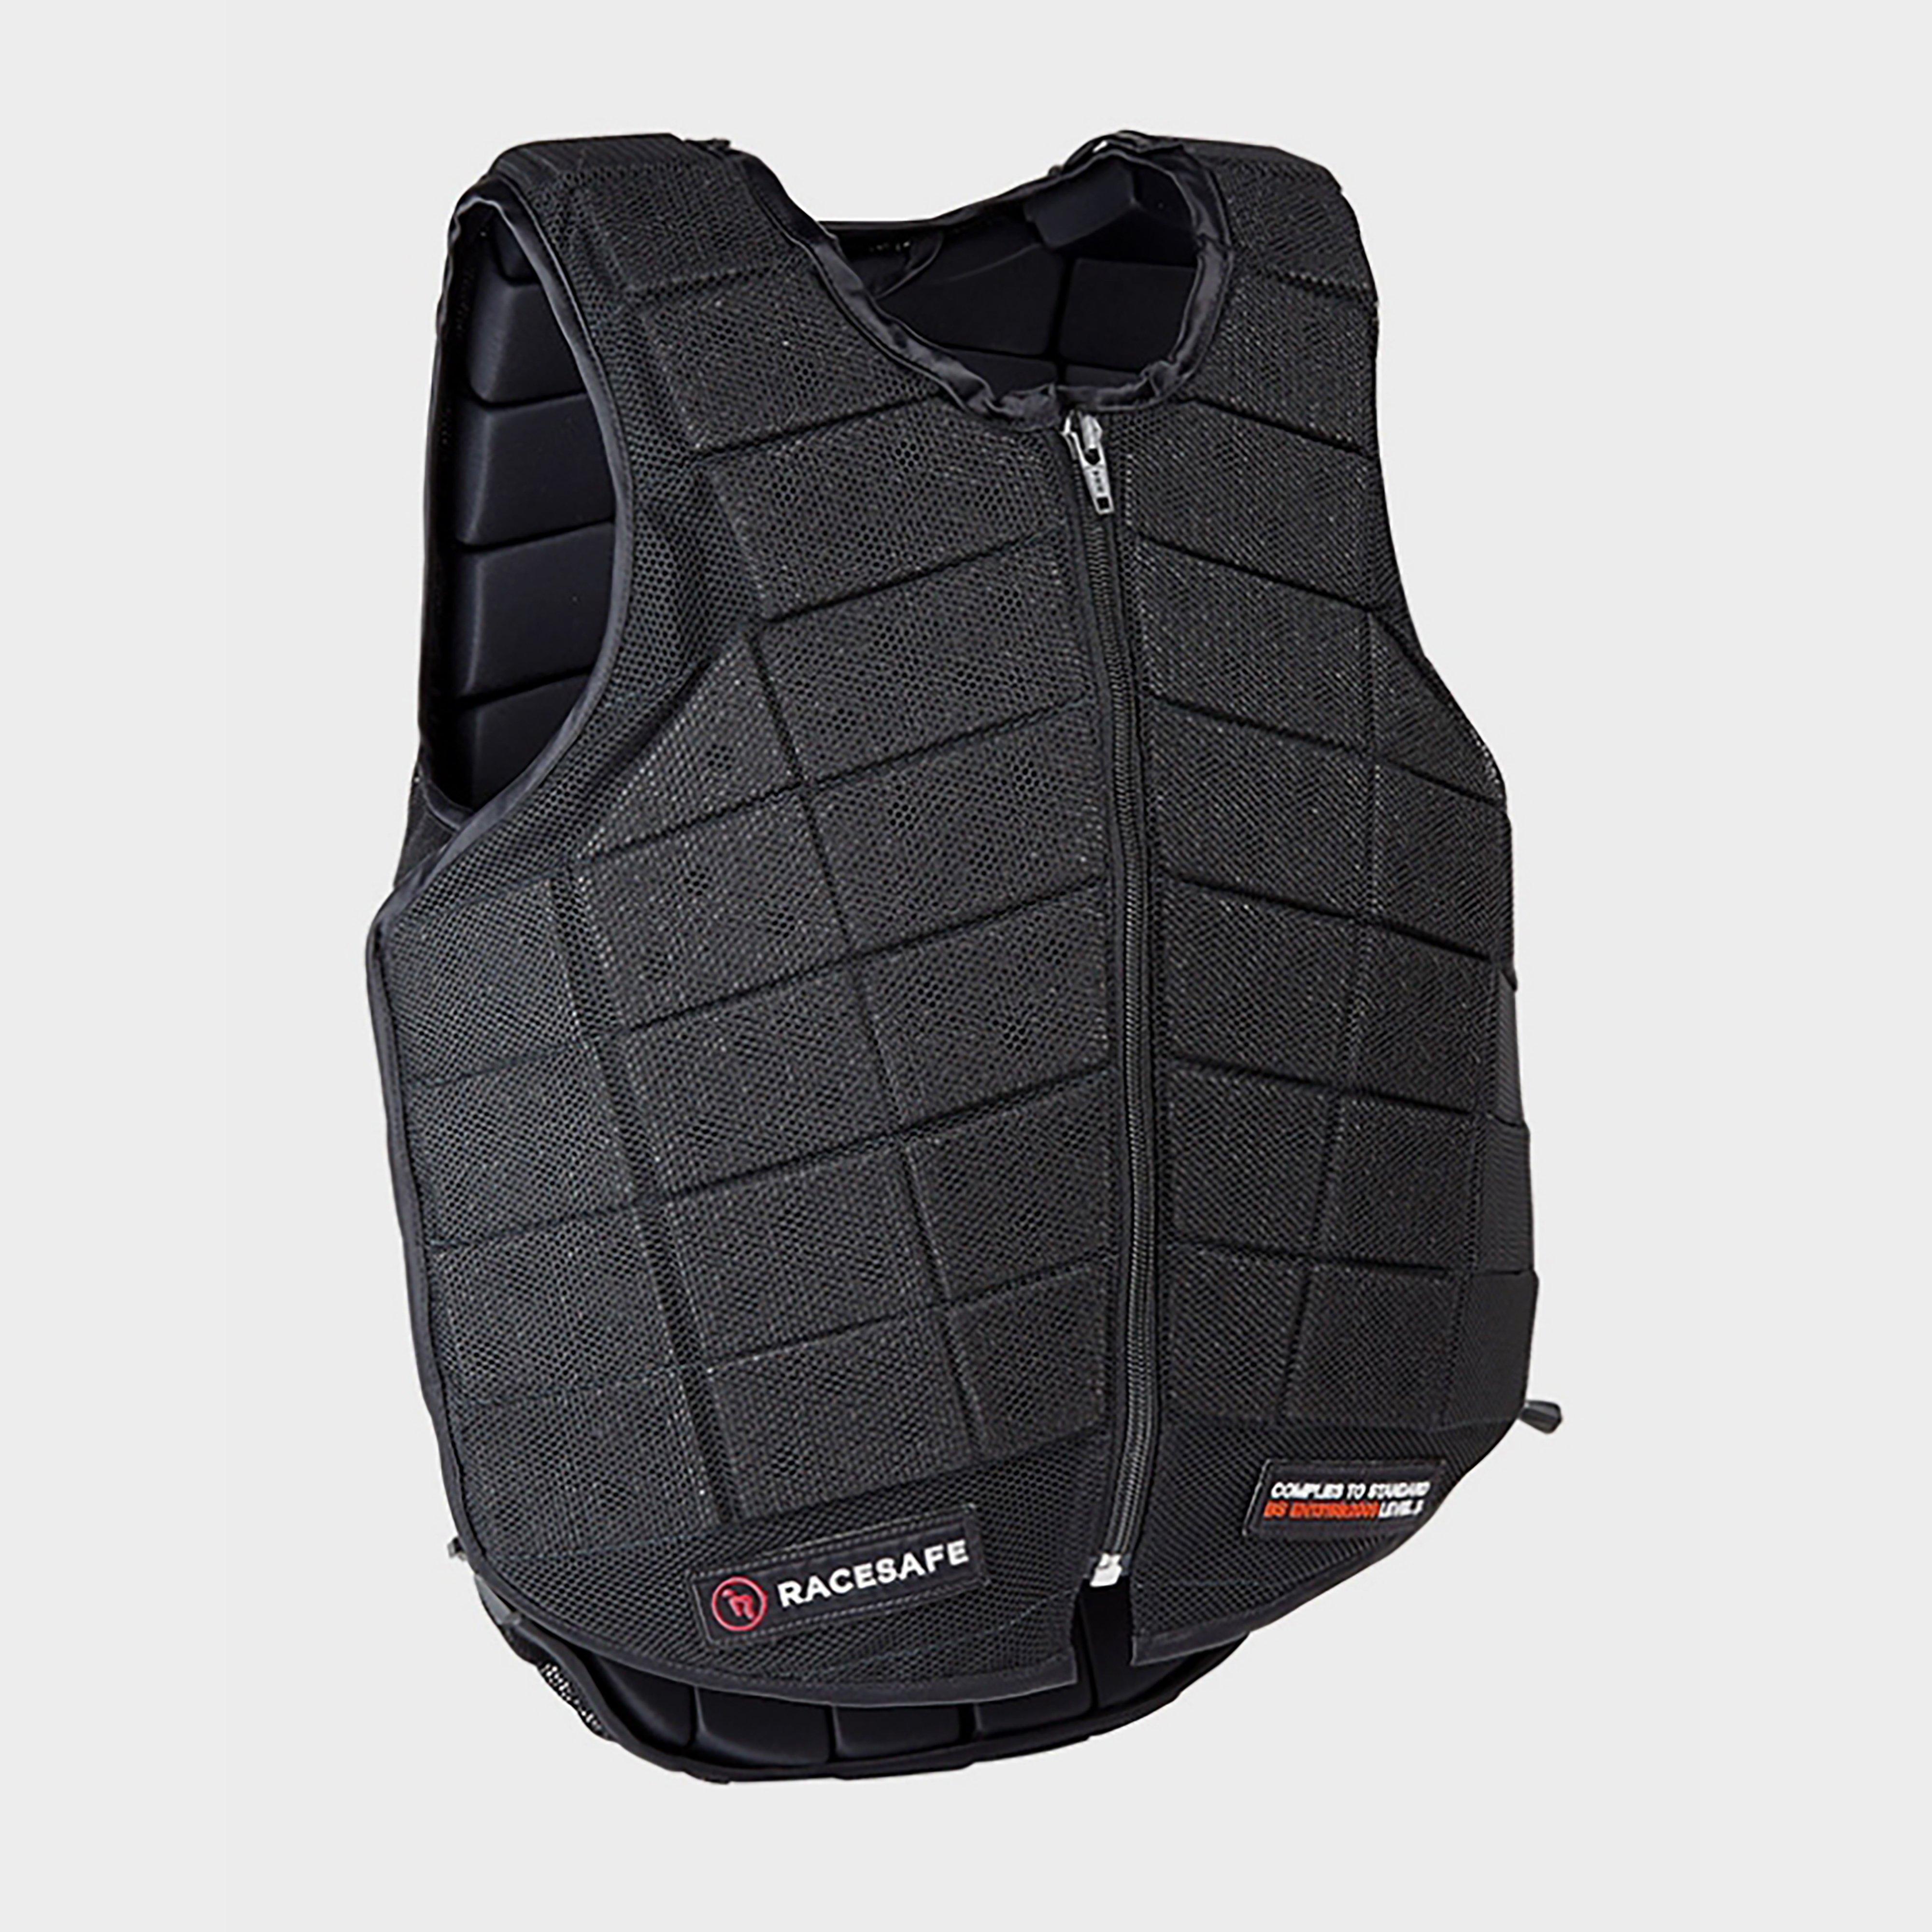  Racesafe Adults ProVent 3.0 Body Protector - Short, Black